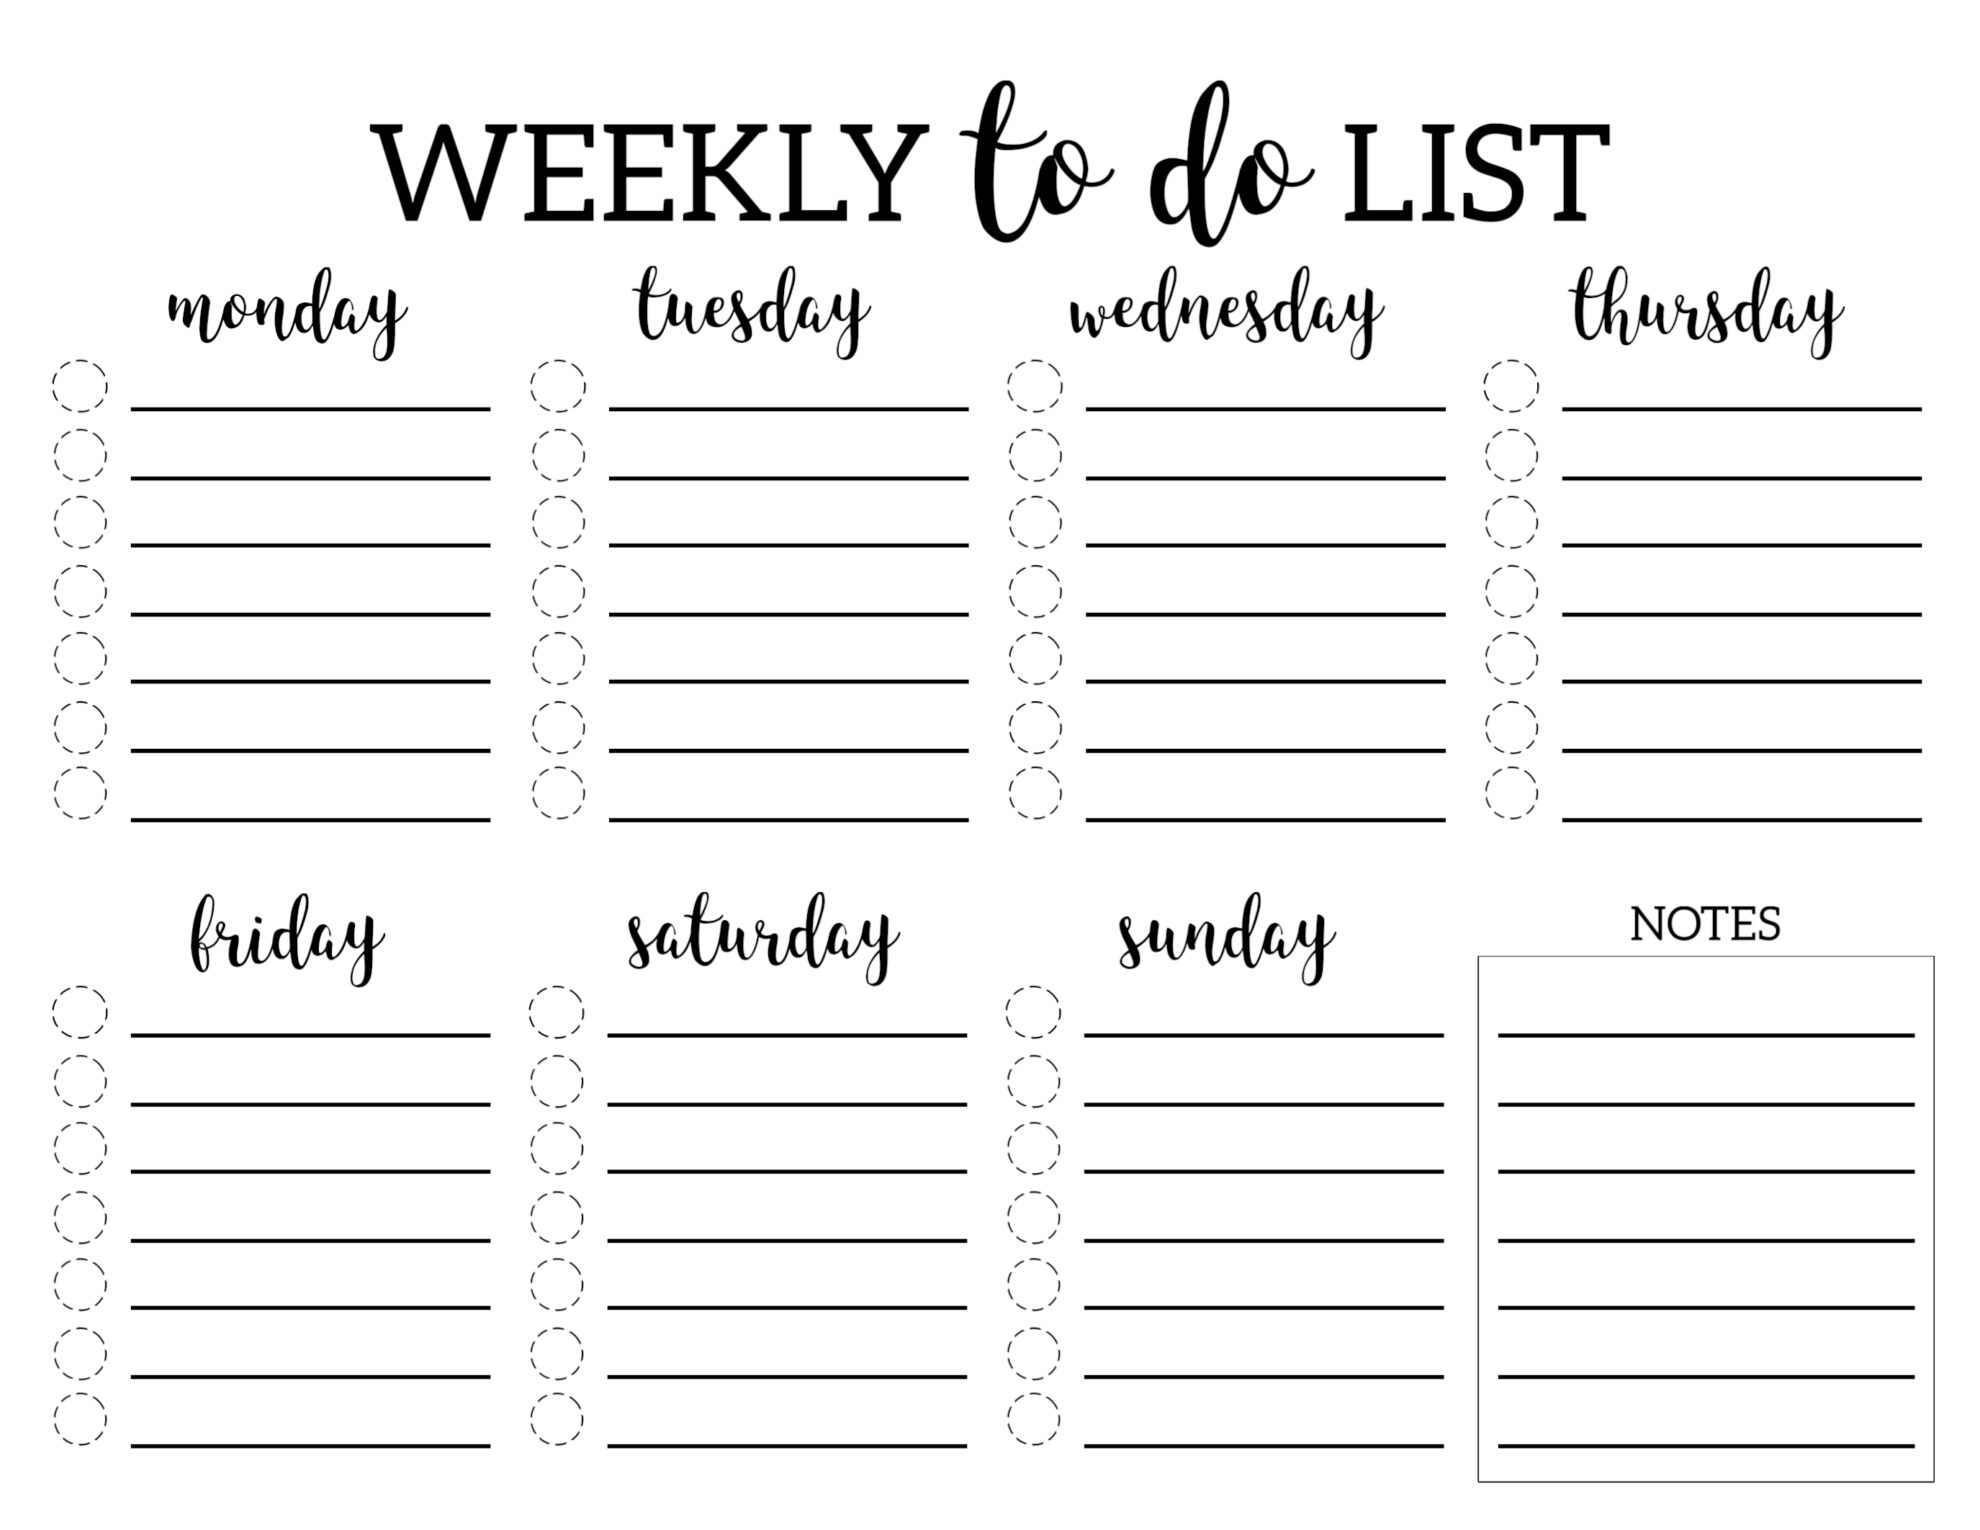 Weekly To Do List Printable Checklist Template  Paper Trail within Printable Blank Checklist